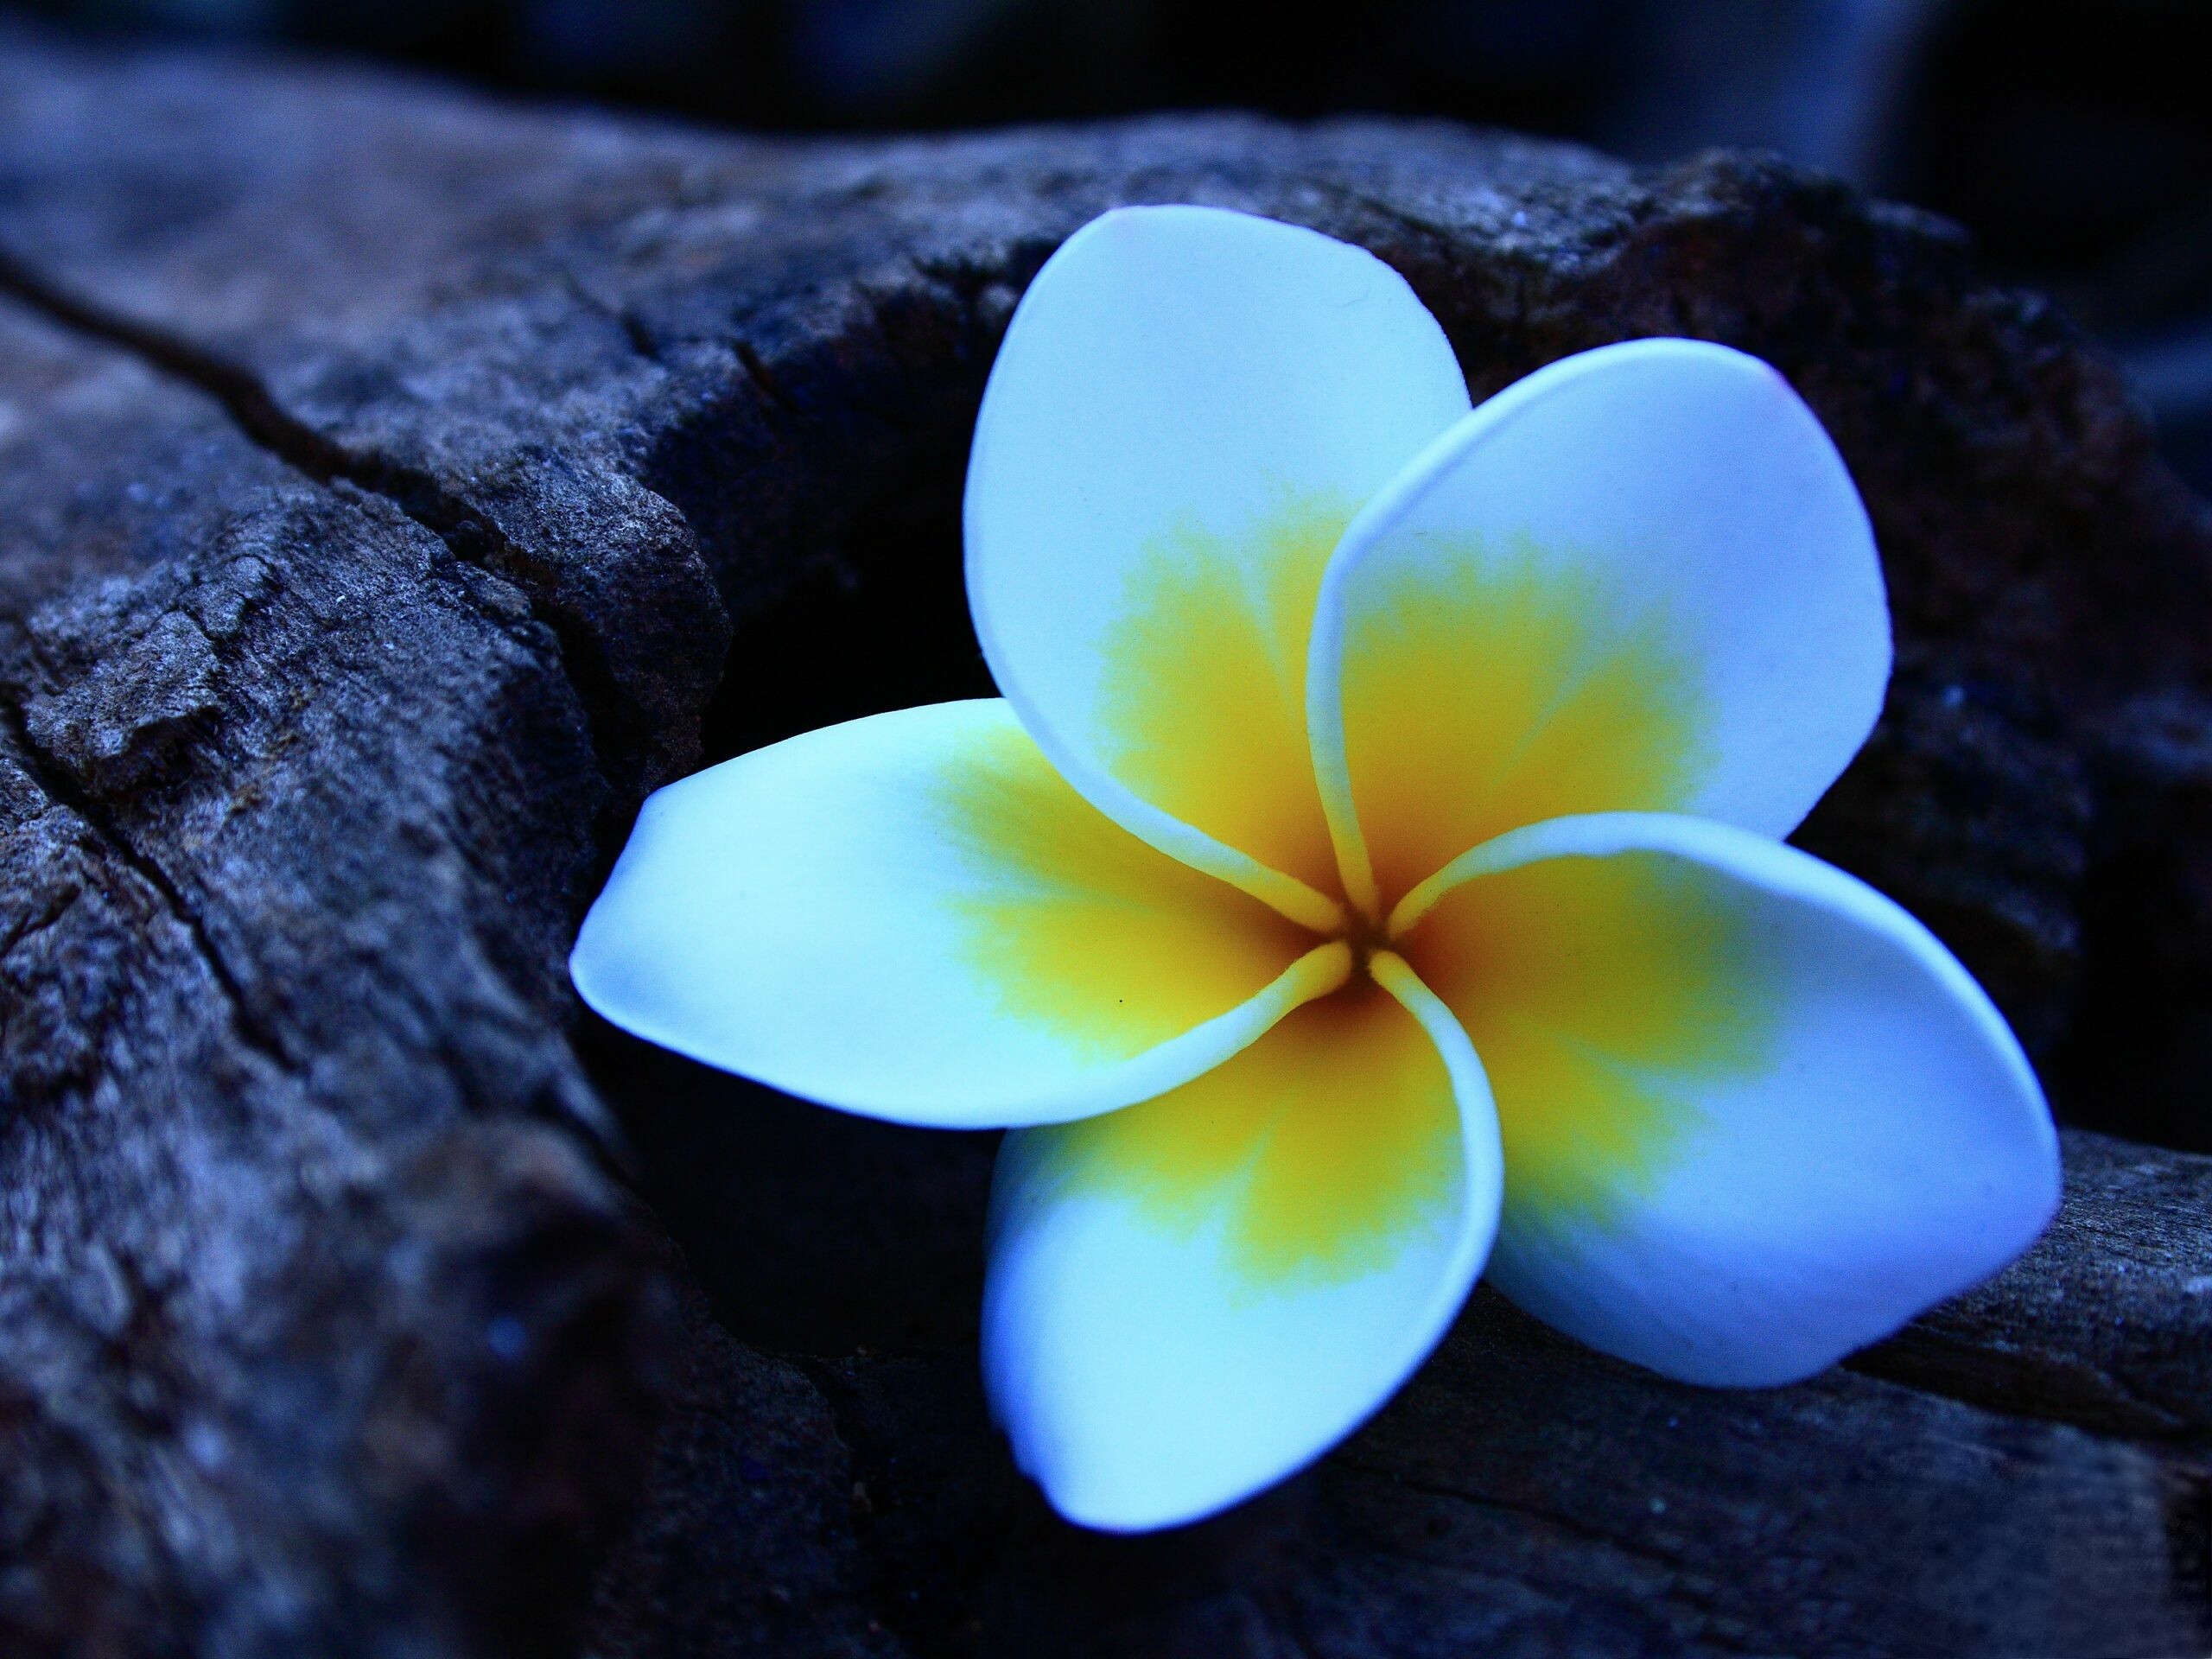 Frangipani Flower: In Southeast Asia, the plumeria tree and flowers are considered sacred. 2560x1920 HD Background.